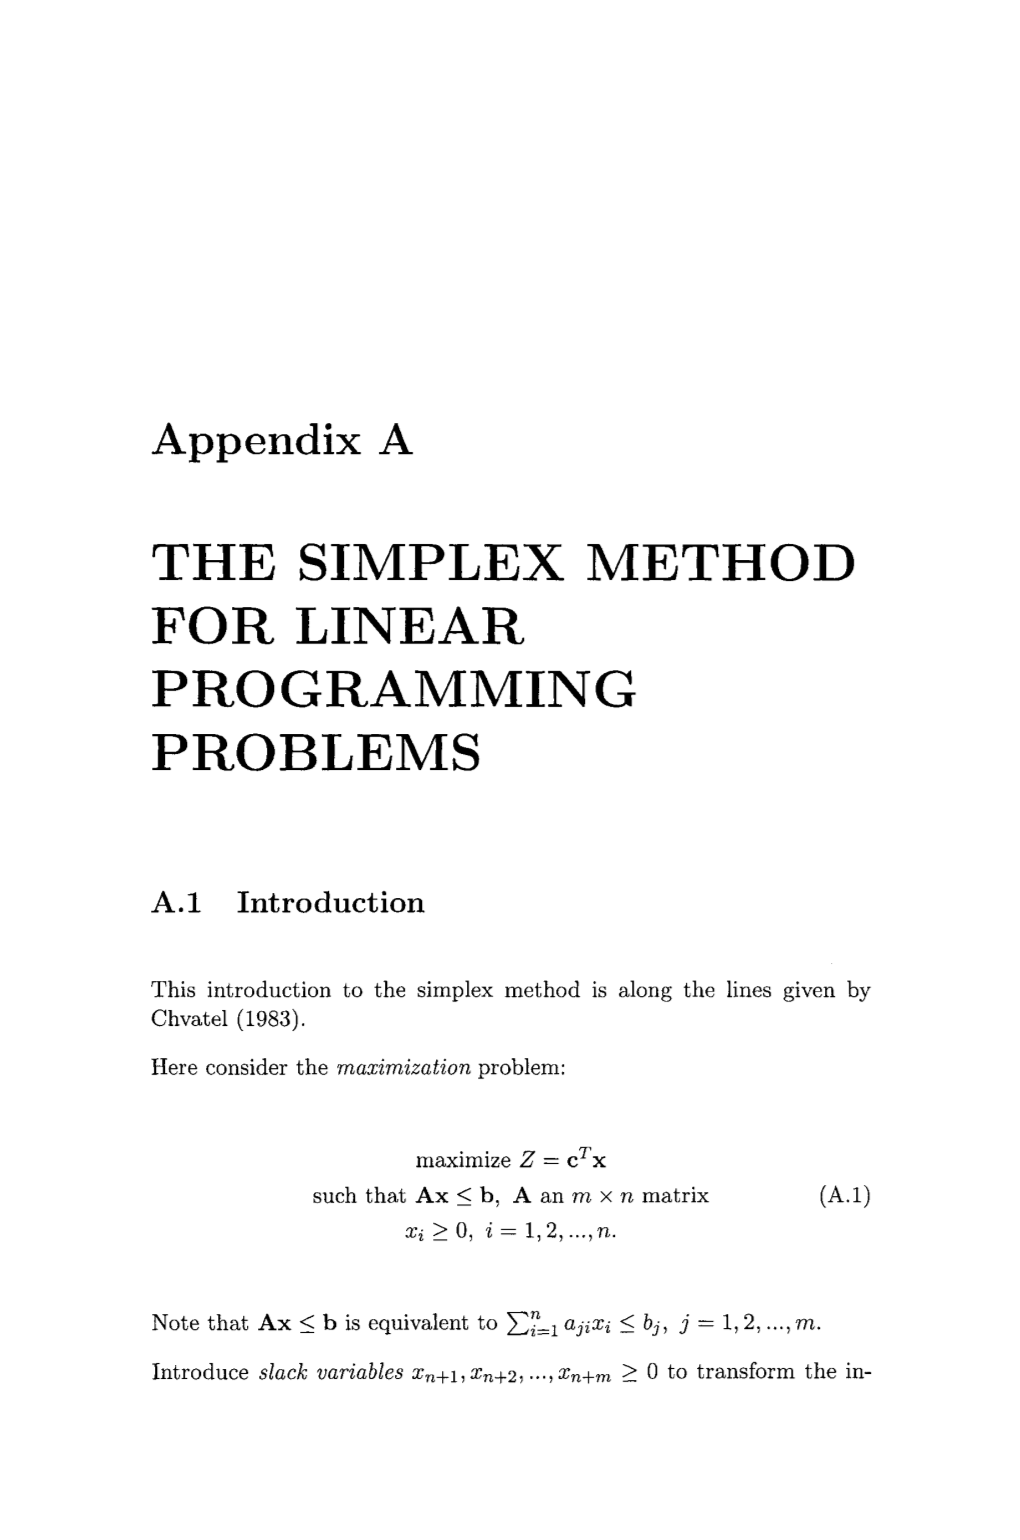 The Simplex Method for Linear Programming Problems